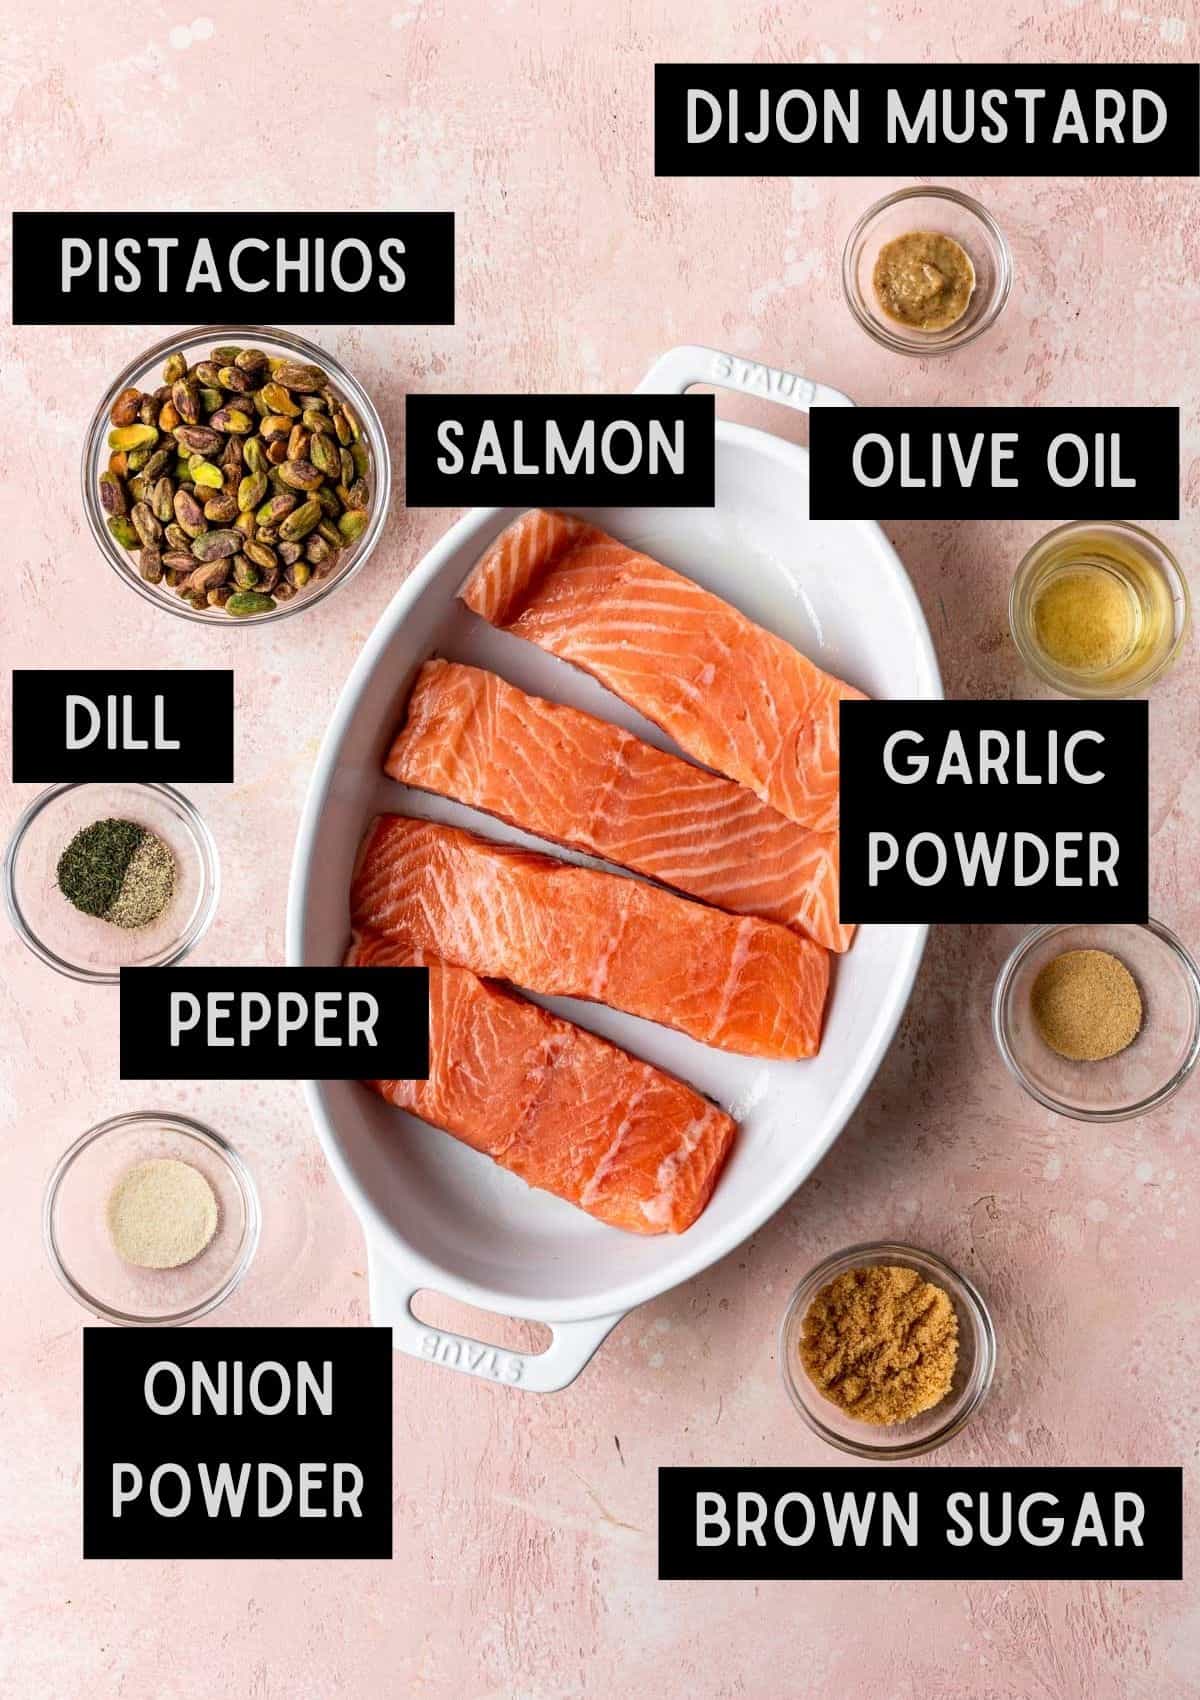 Labelled ingredients for pistachio crusted salmon (see recipe for details).